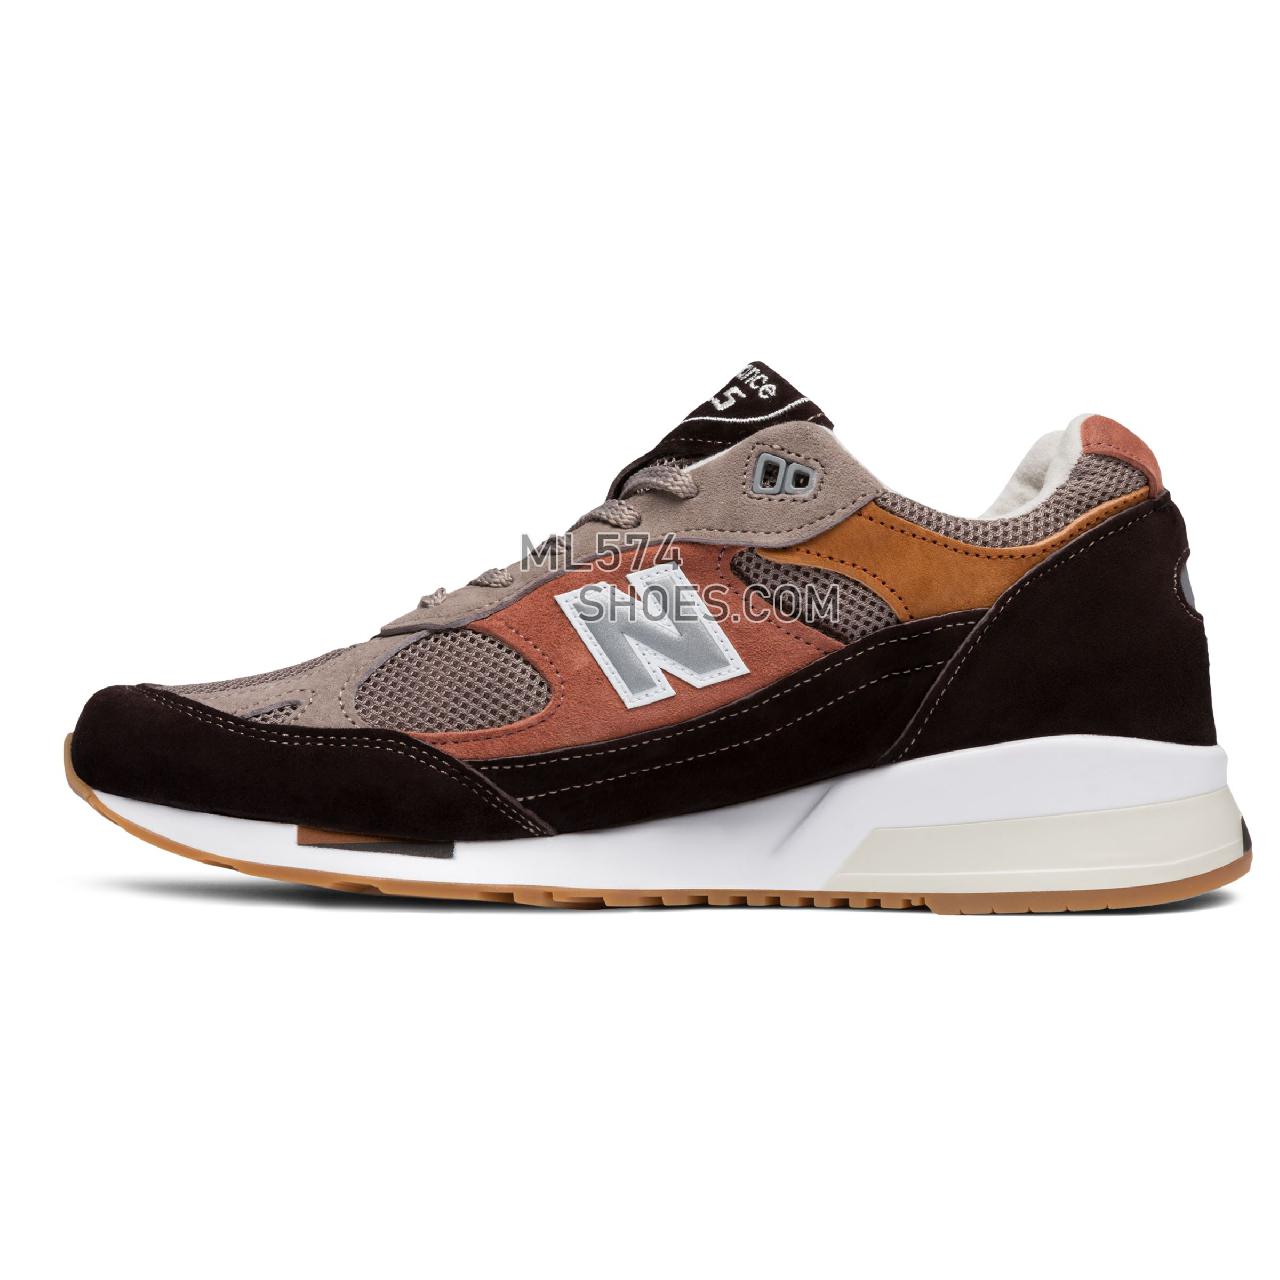 New Balance 991.5 Made in UK - Men's 991.5 Made in UK Classic M9915-SOL - Deliciosso with Tan - M9915FT